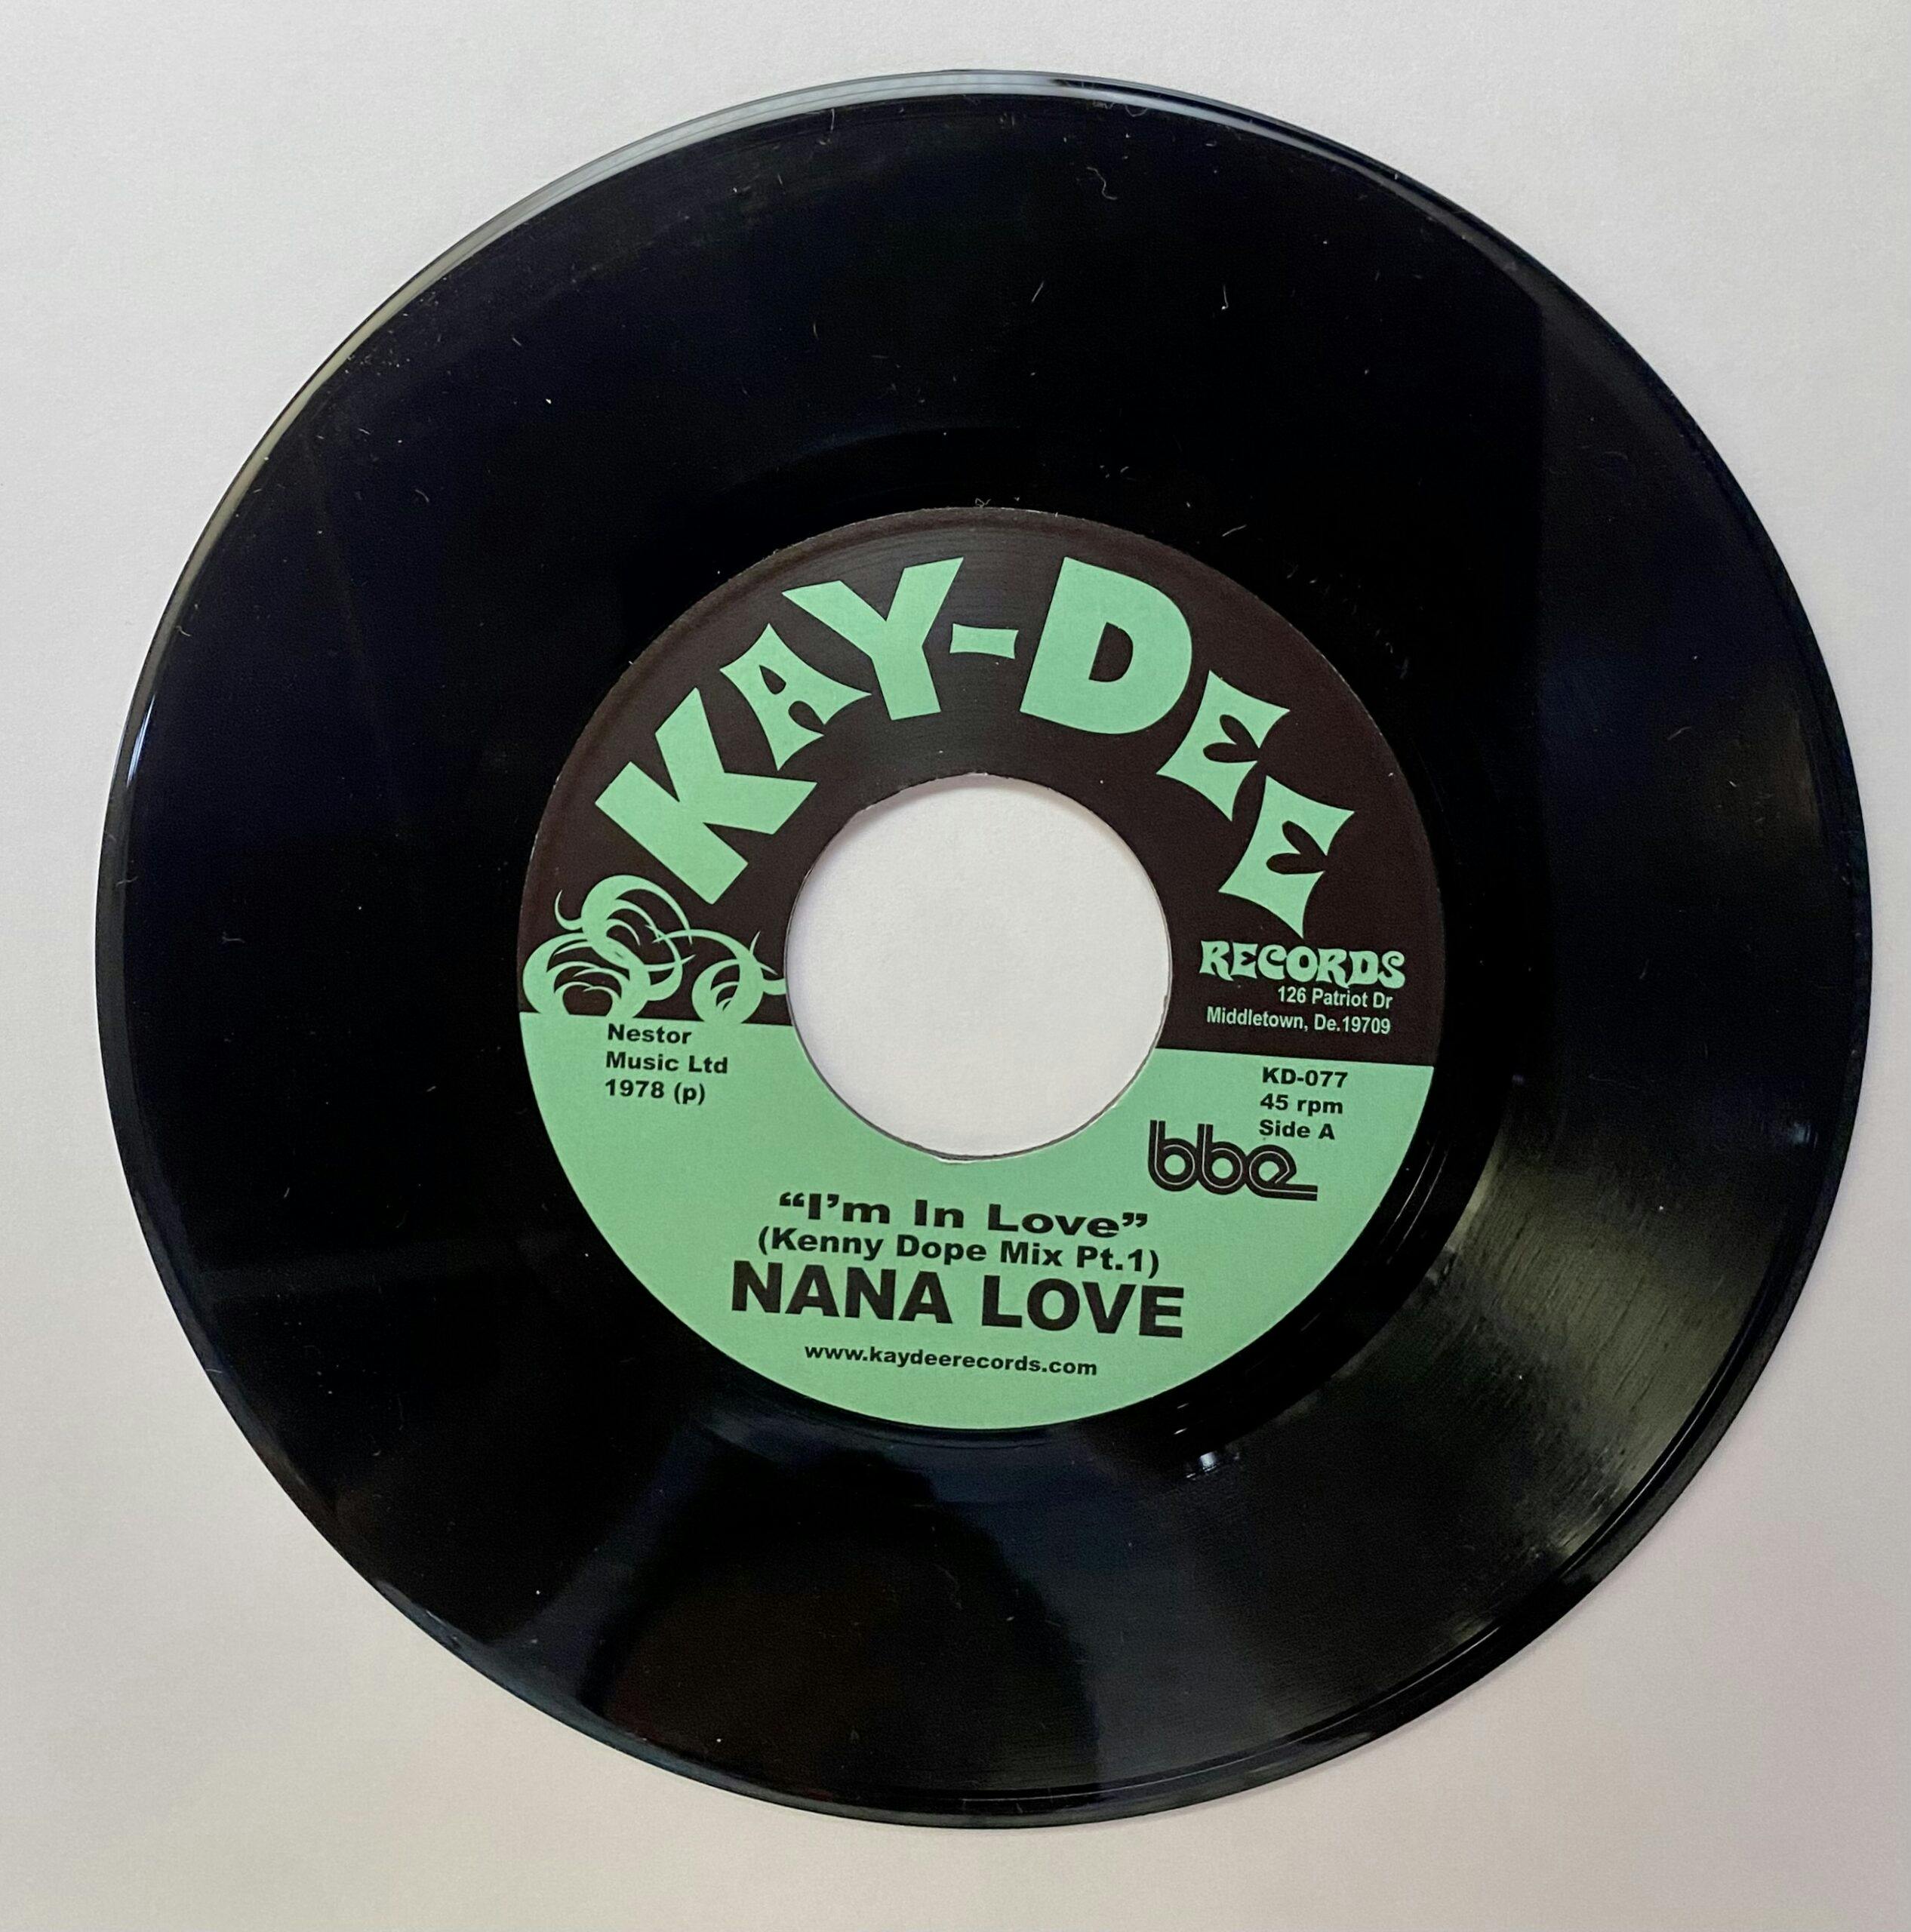 The legendary Kenny Dope with collaboration with BBE Records gets down to work on this Afro Disco classic from Ghanian Disco queen Nana Love.